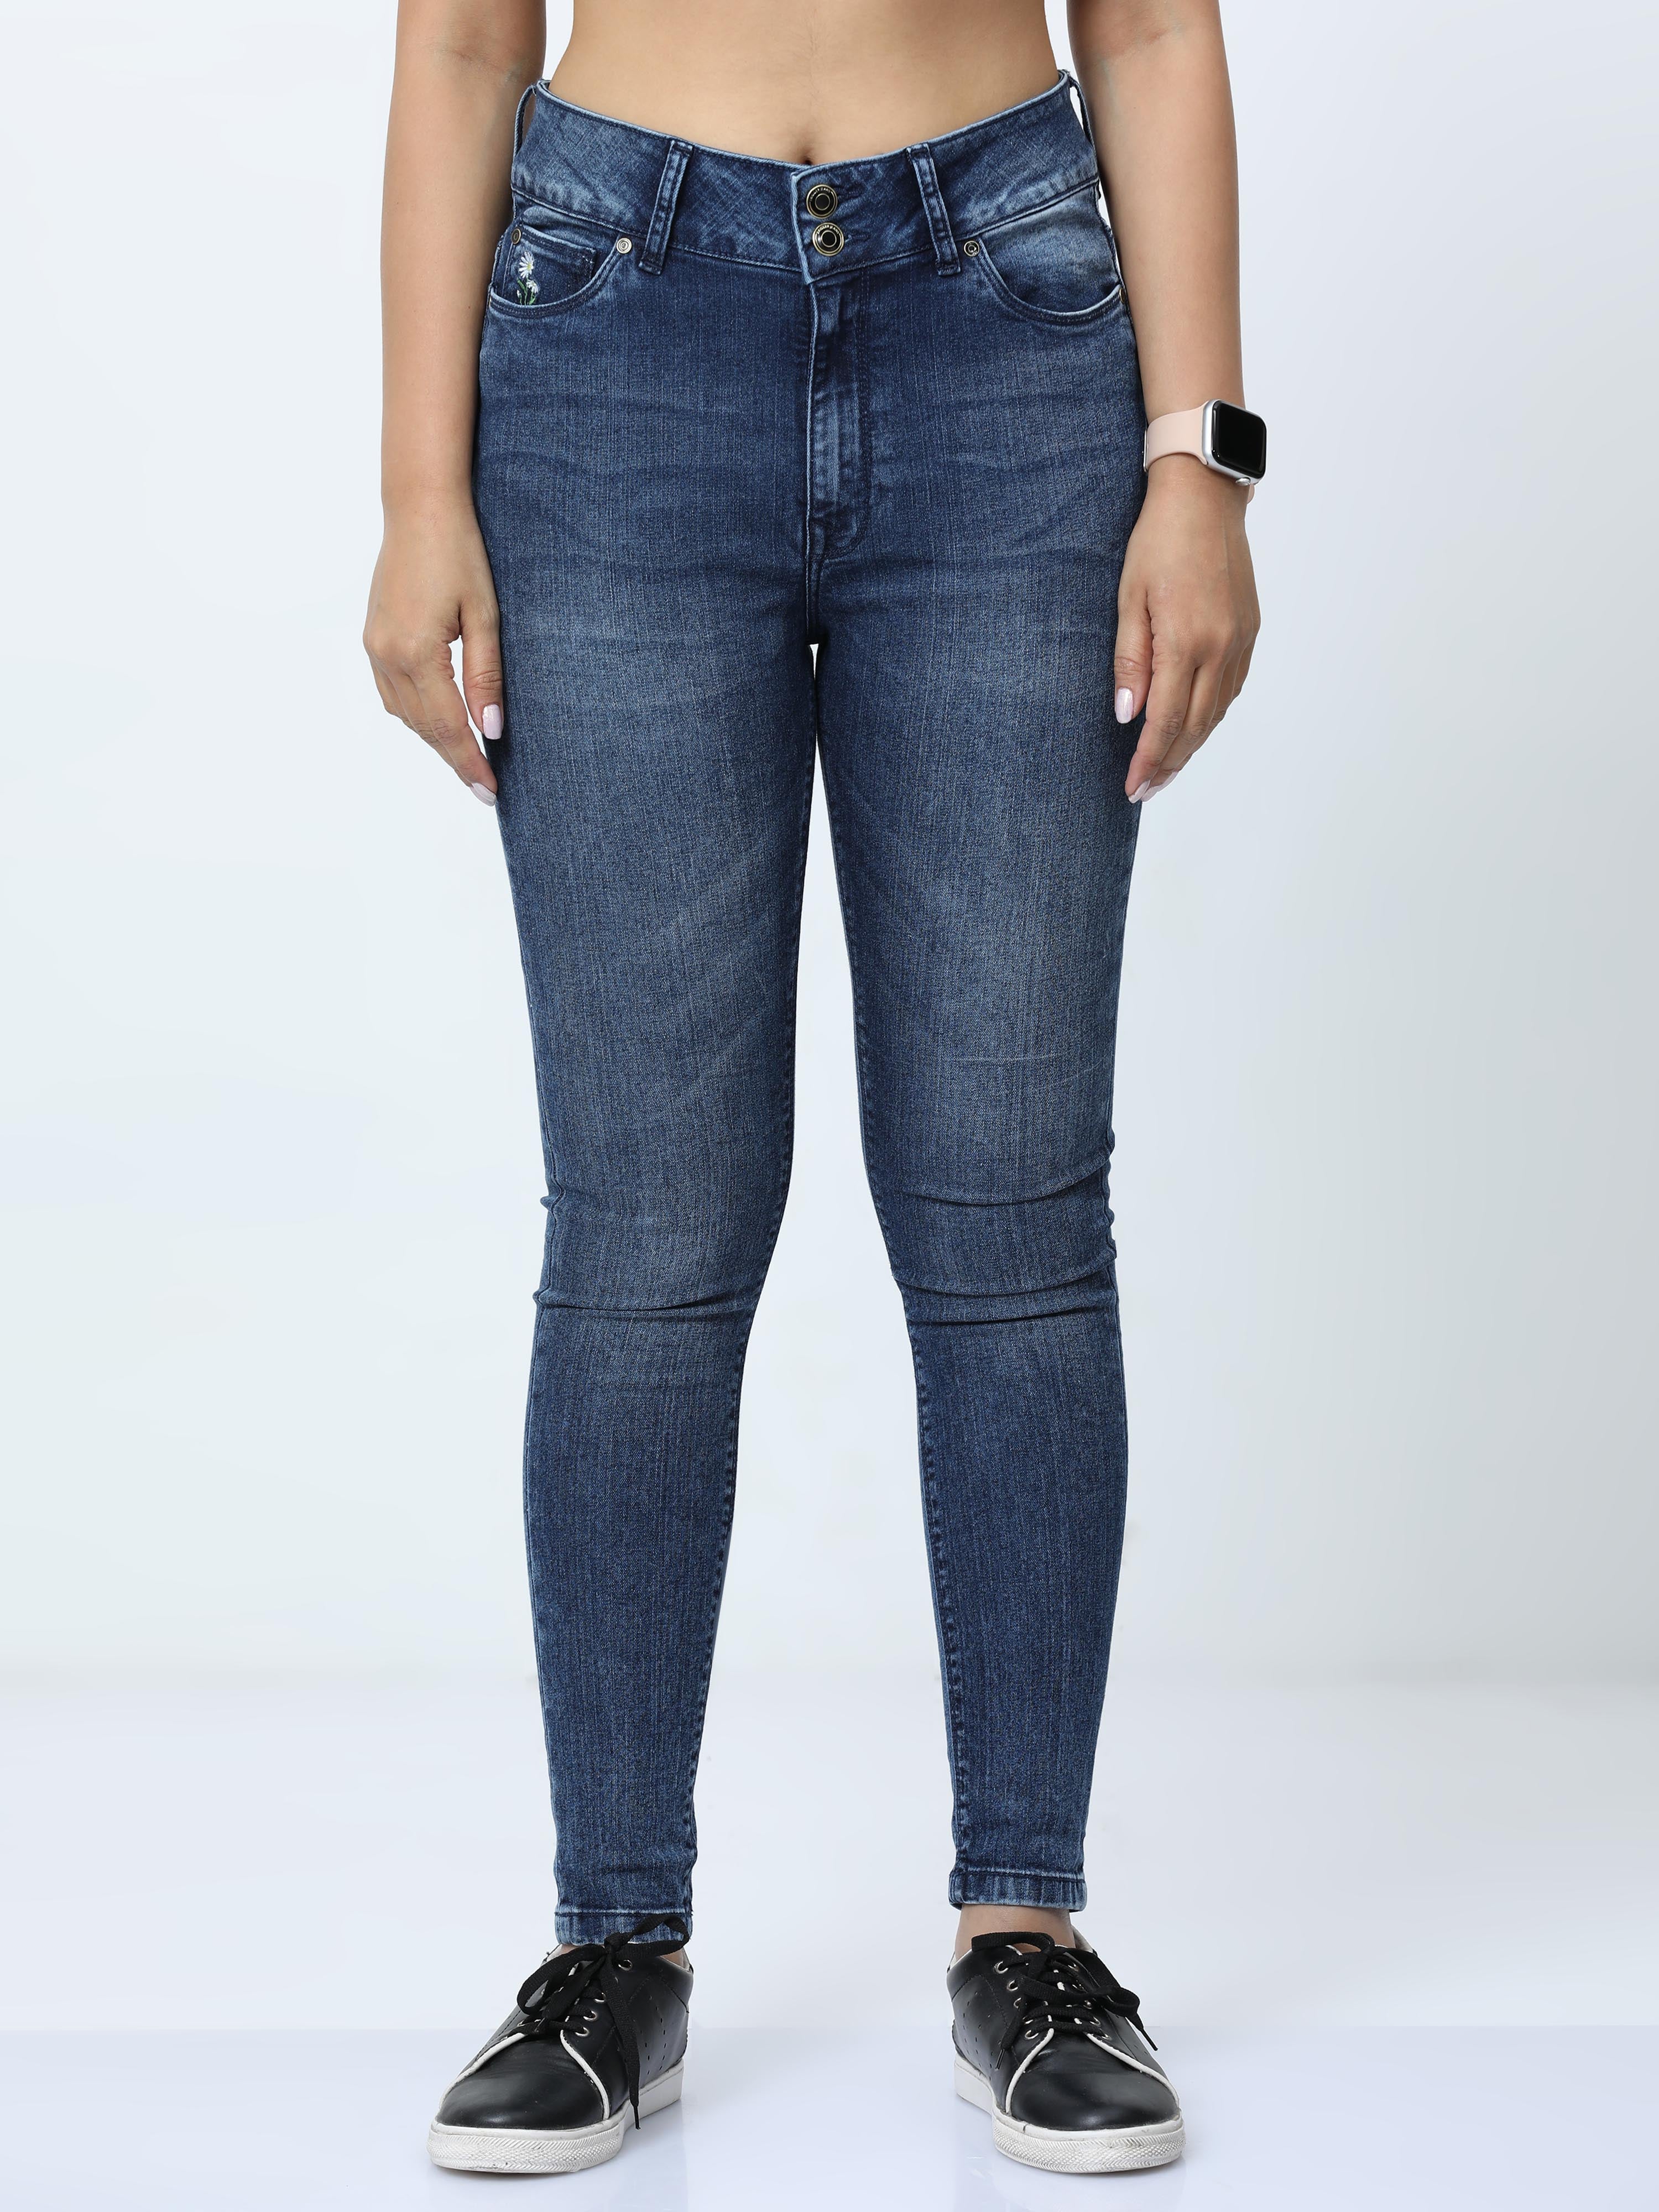 Indico Acid wash  womens skinny fit jeans